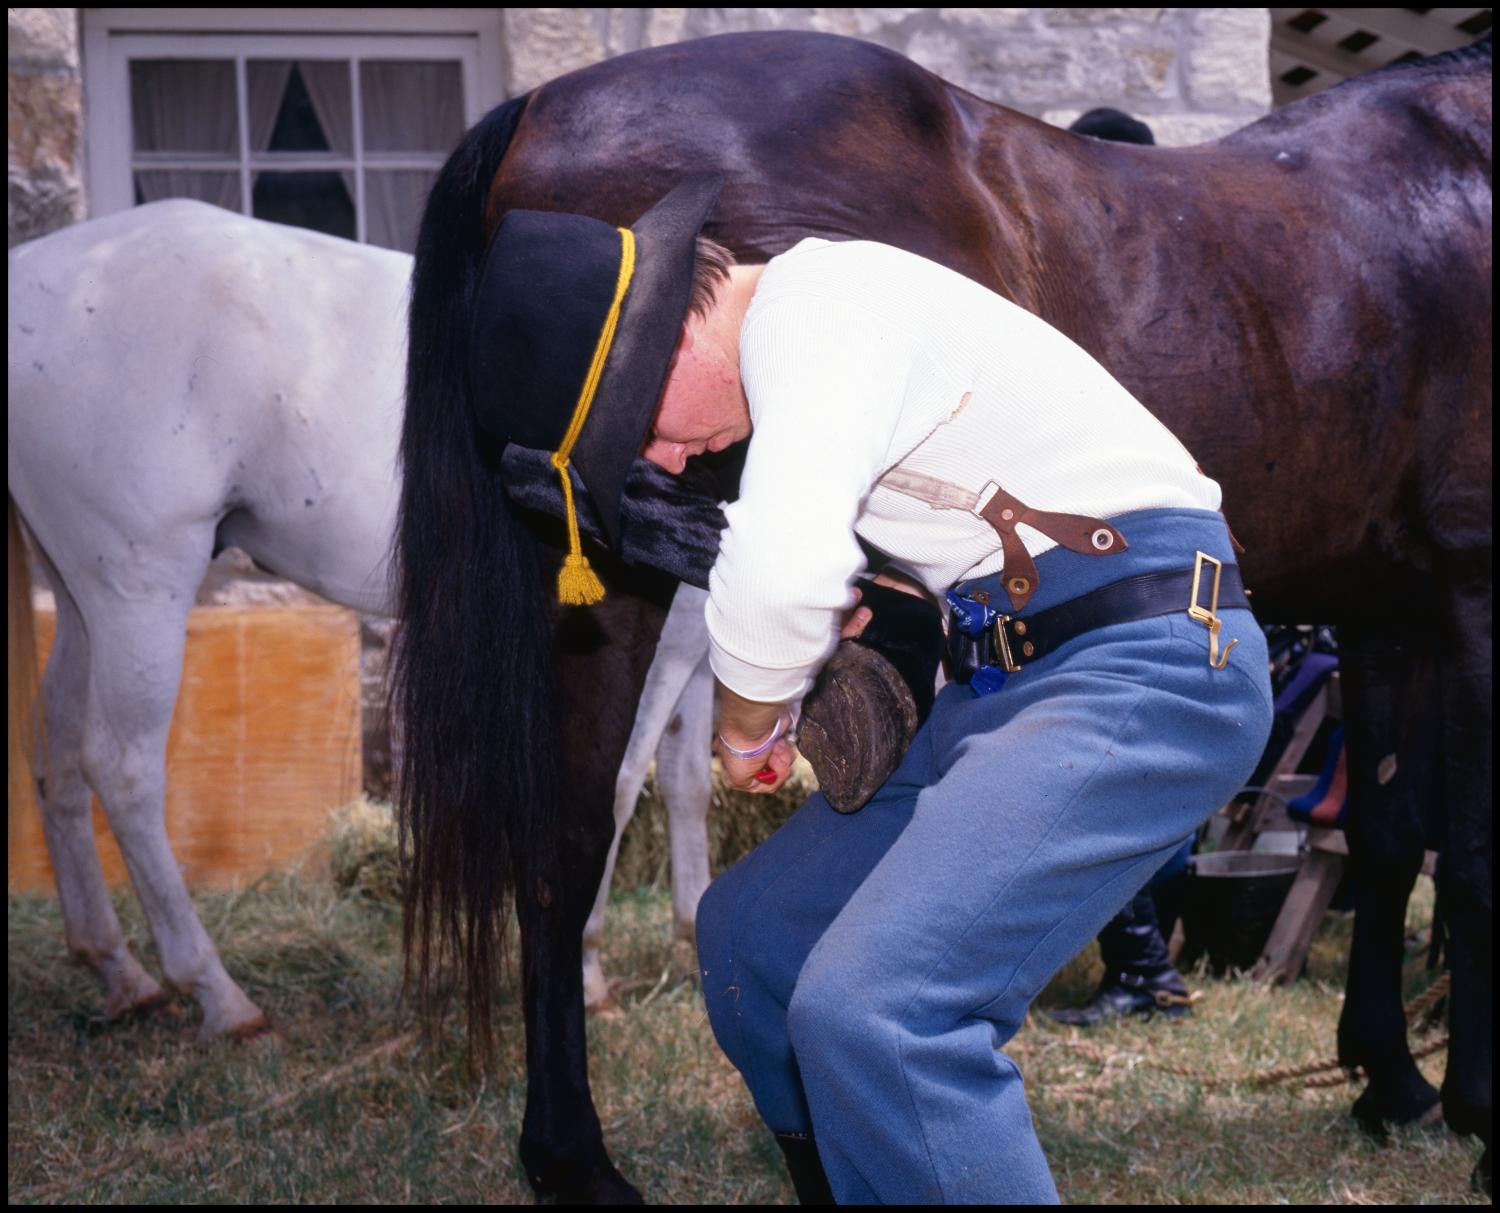 [Frontier Soldier Shoeing a Horse]
                                                
                                                    [Sequence #]: 1 of 1
                                                